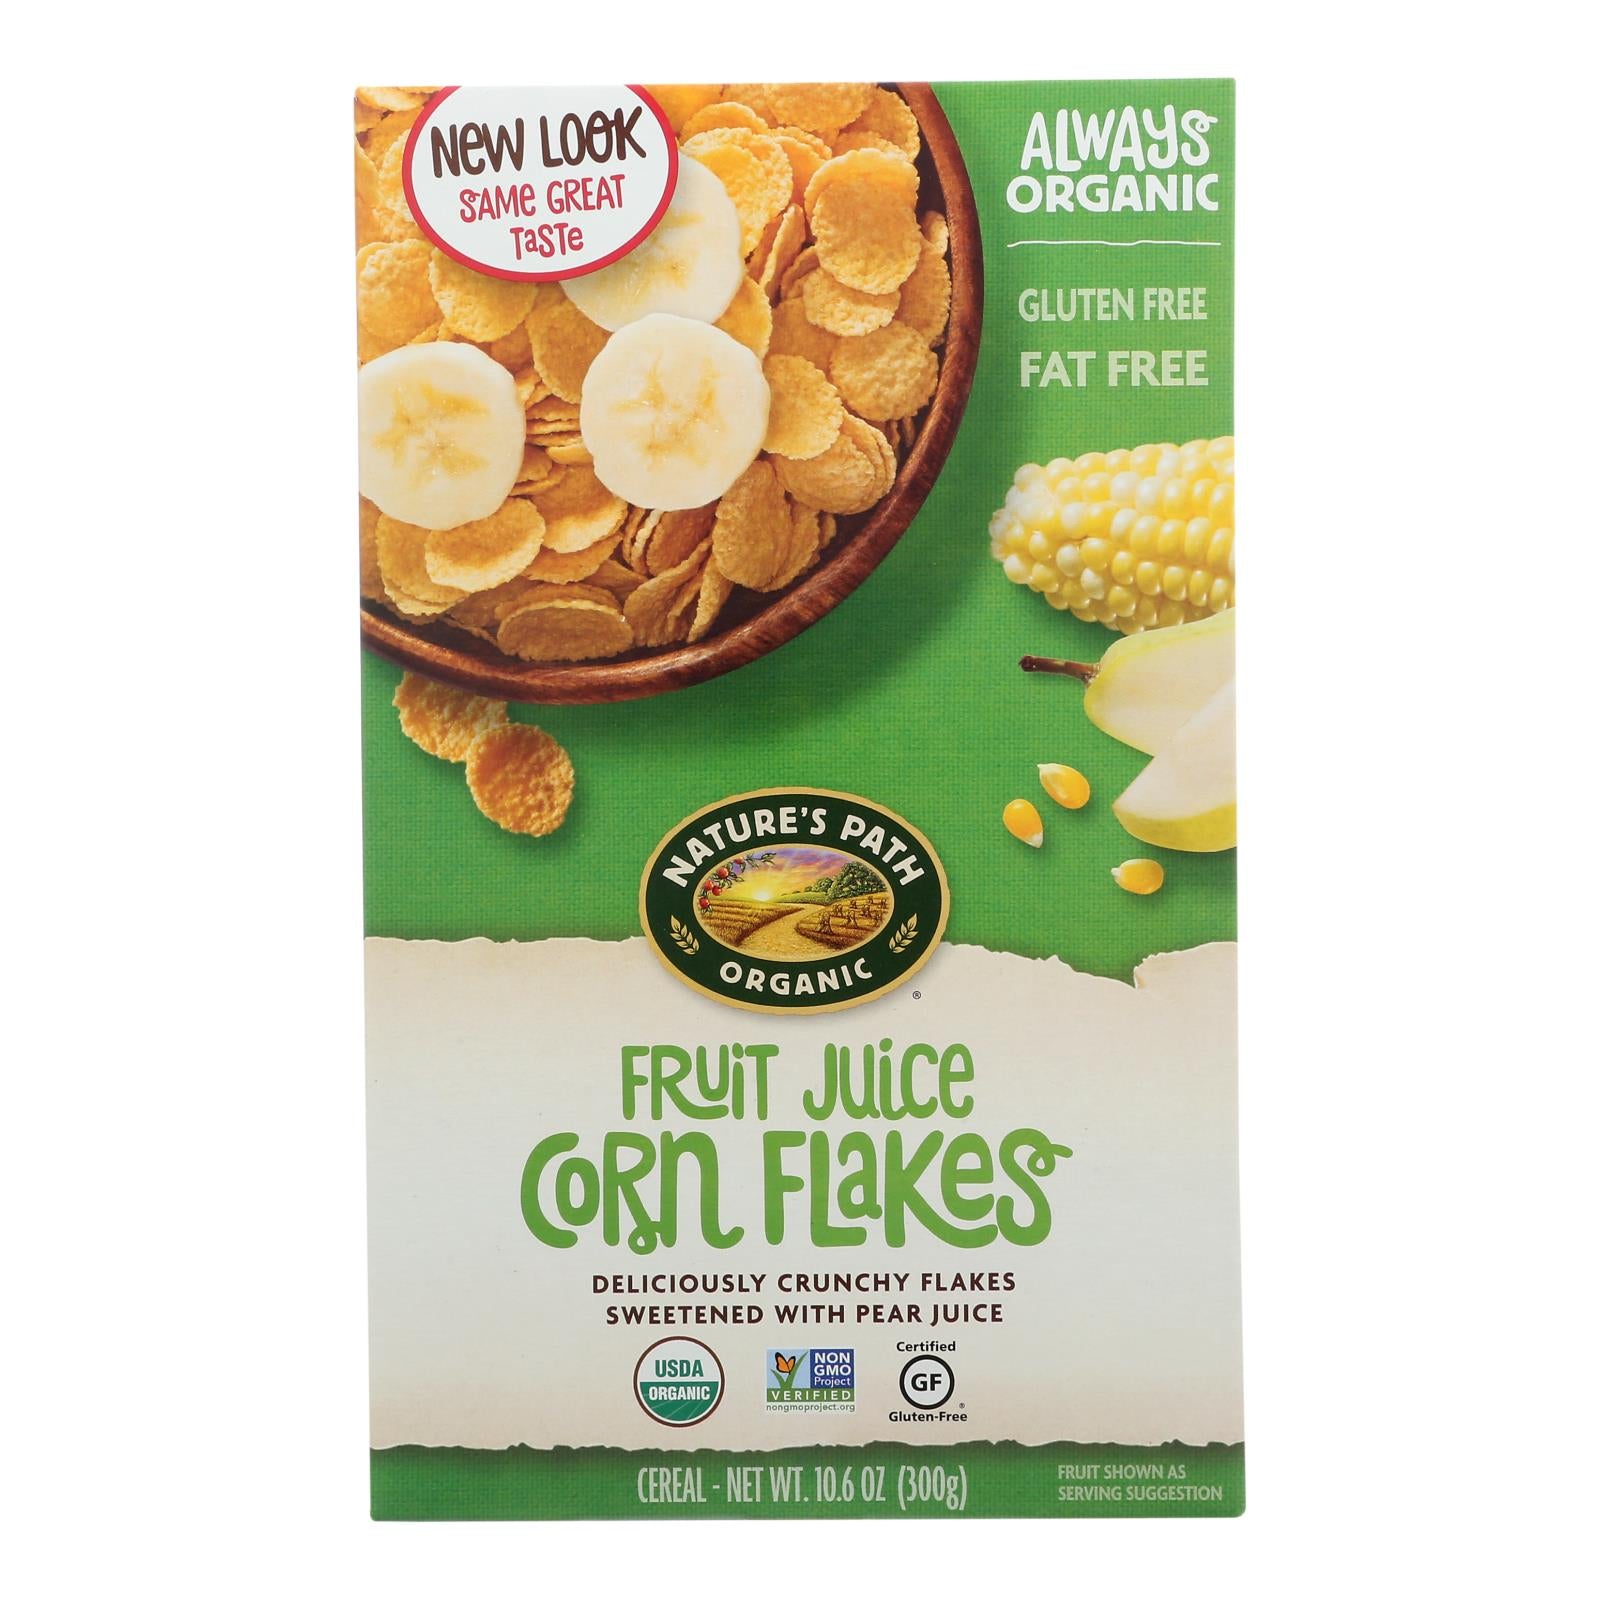 Cereal corn flakes 300g